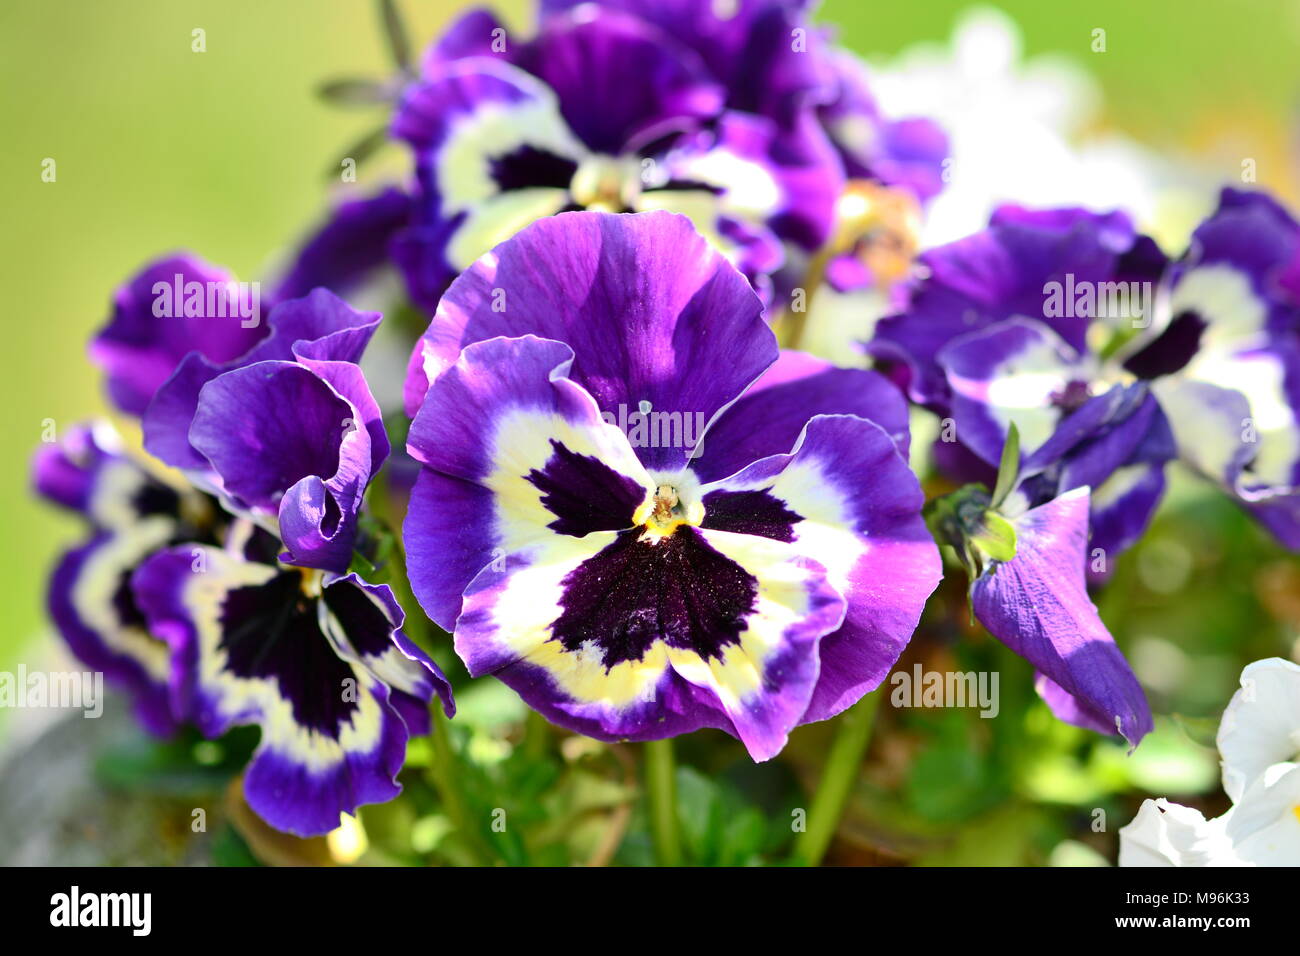 Close up of a bunch of purple pansies Stock Photo